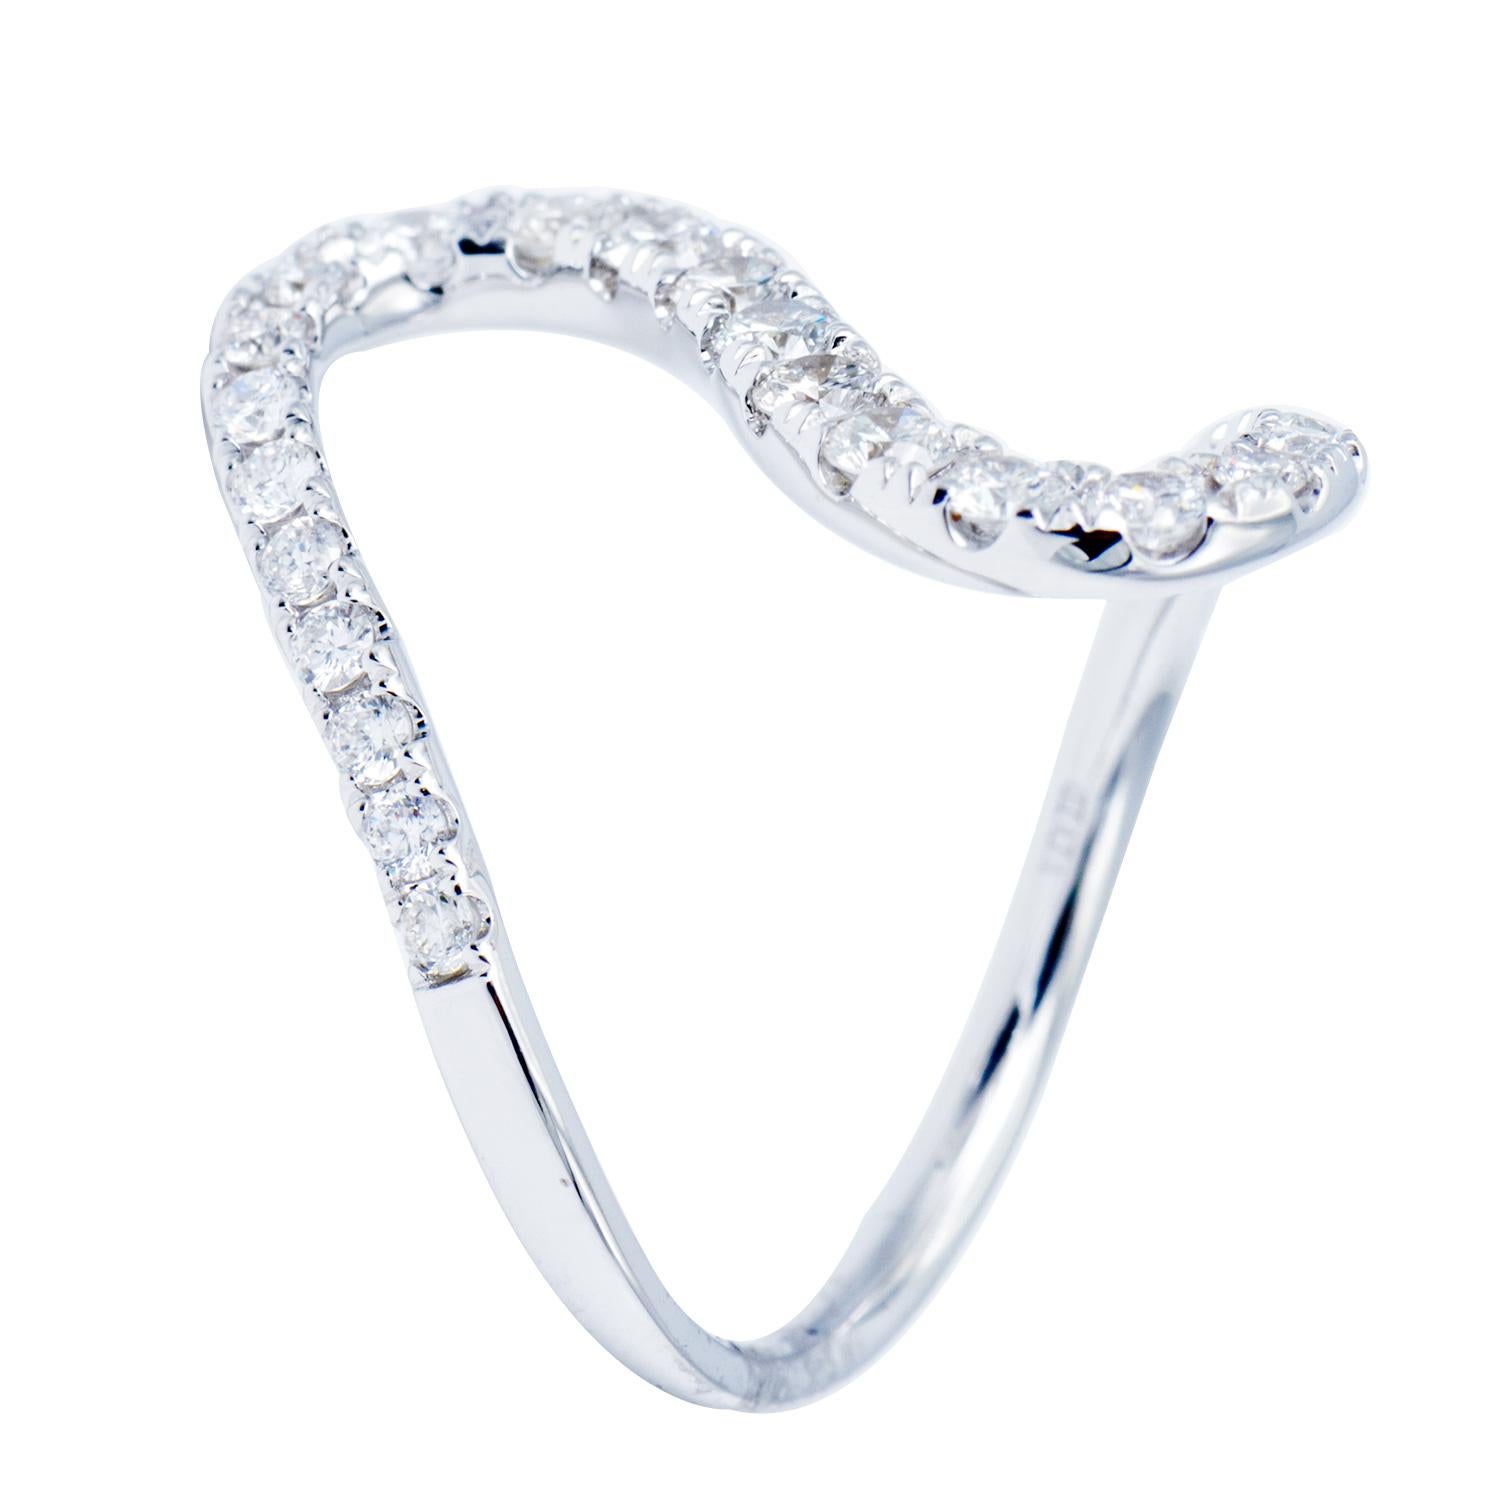 This fun and unique ring is made of 27 round VS2, G color diamonds totaling 0.79 carats which are beautifully set in 3.3 grams of 18 karat white gold. This ring makes a beautiful curve on the finger and is a very modern and fashionable piece. This